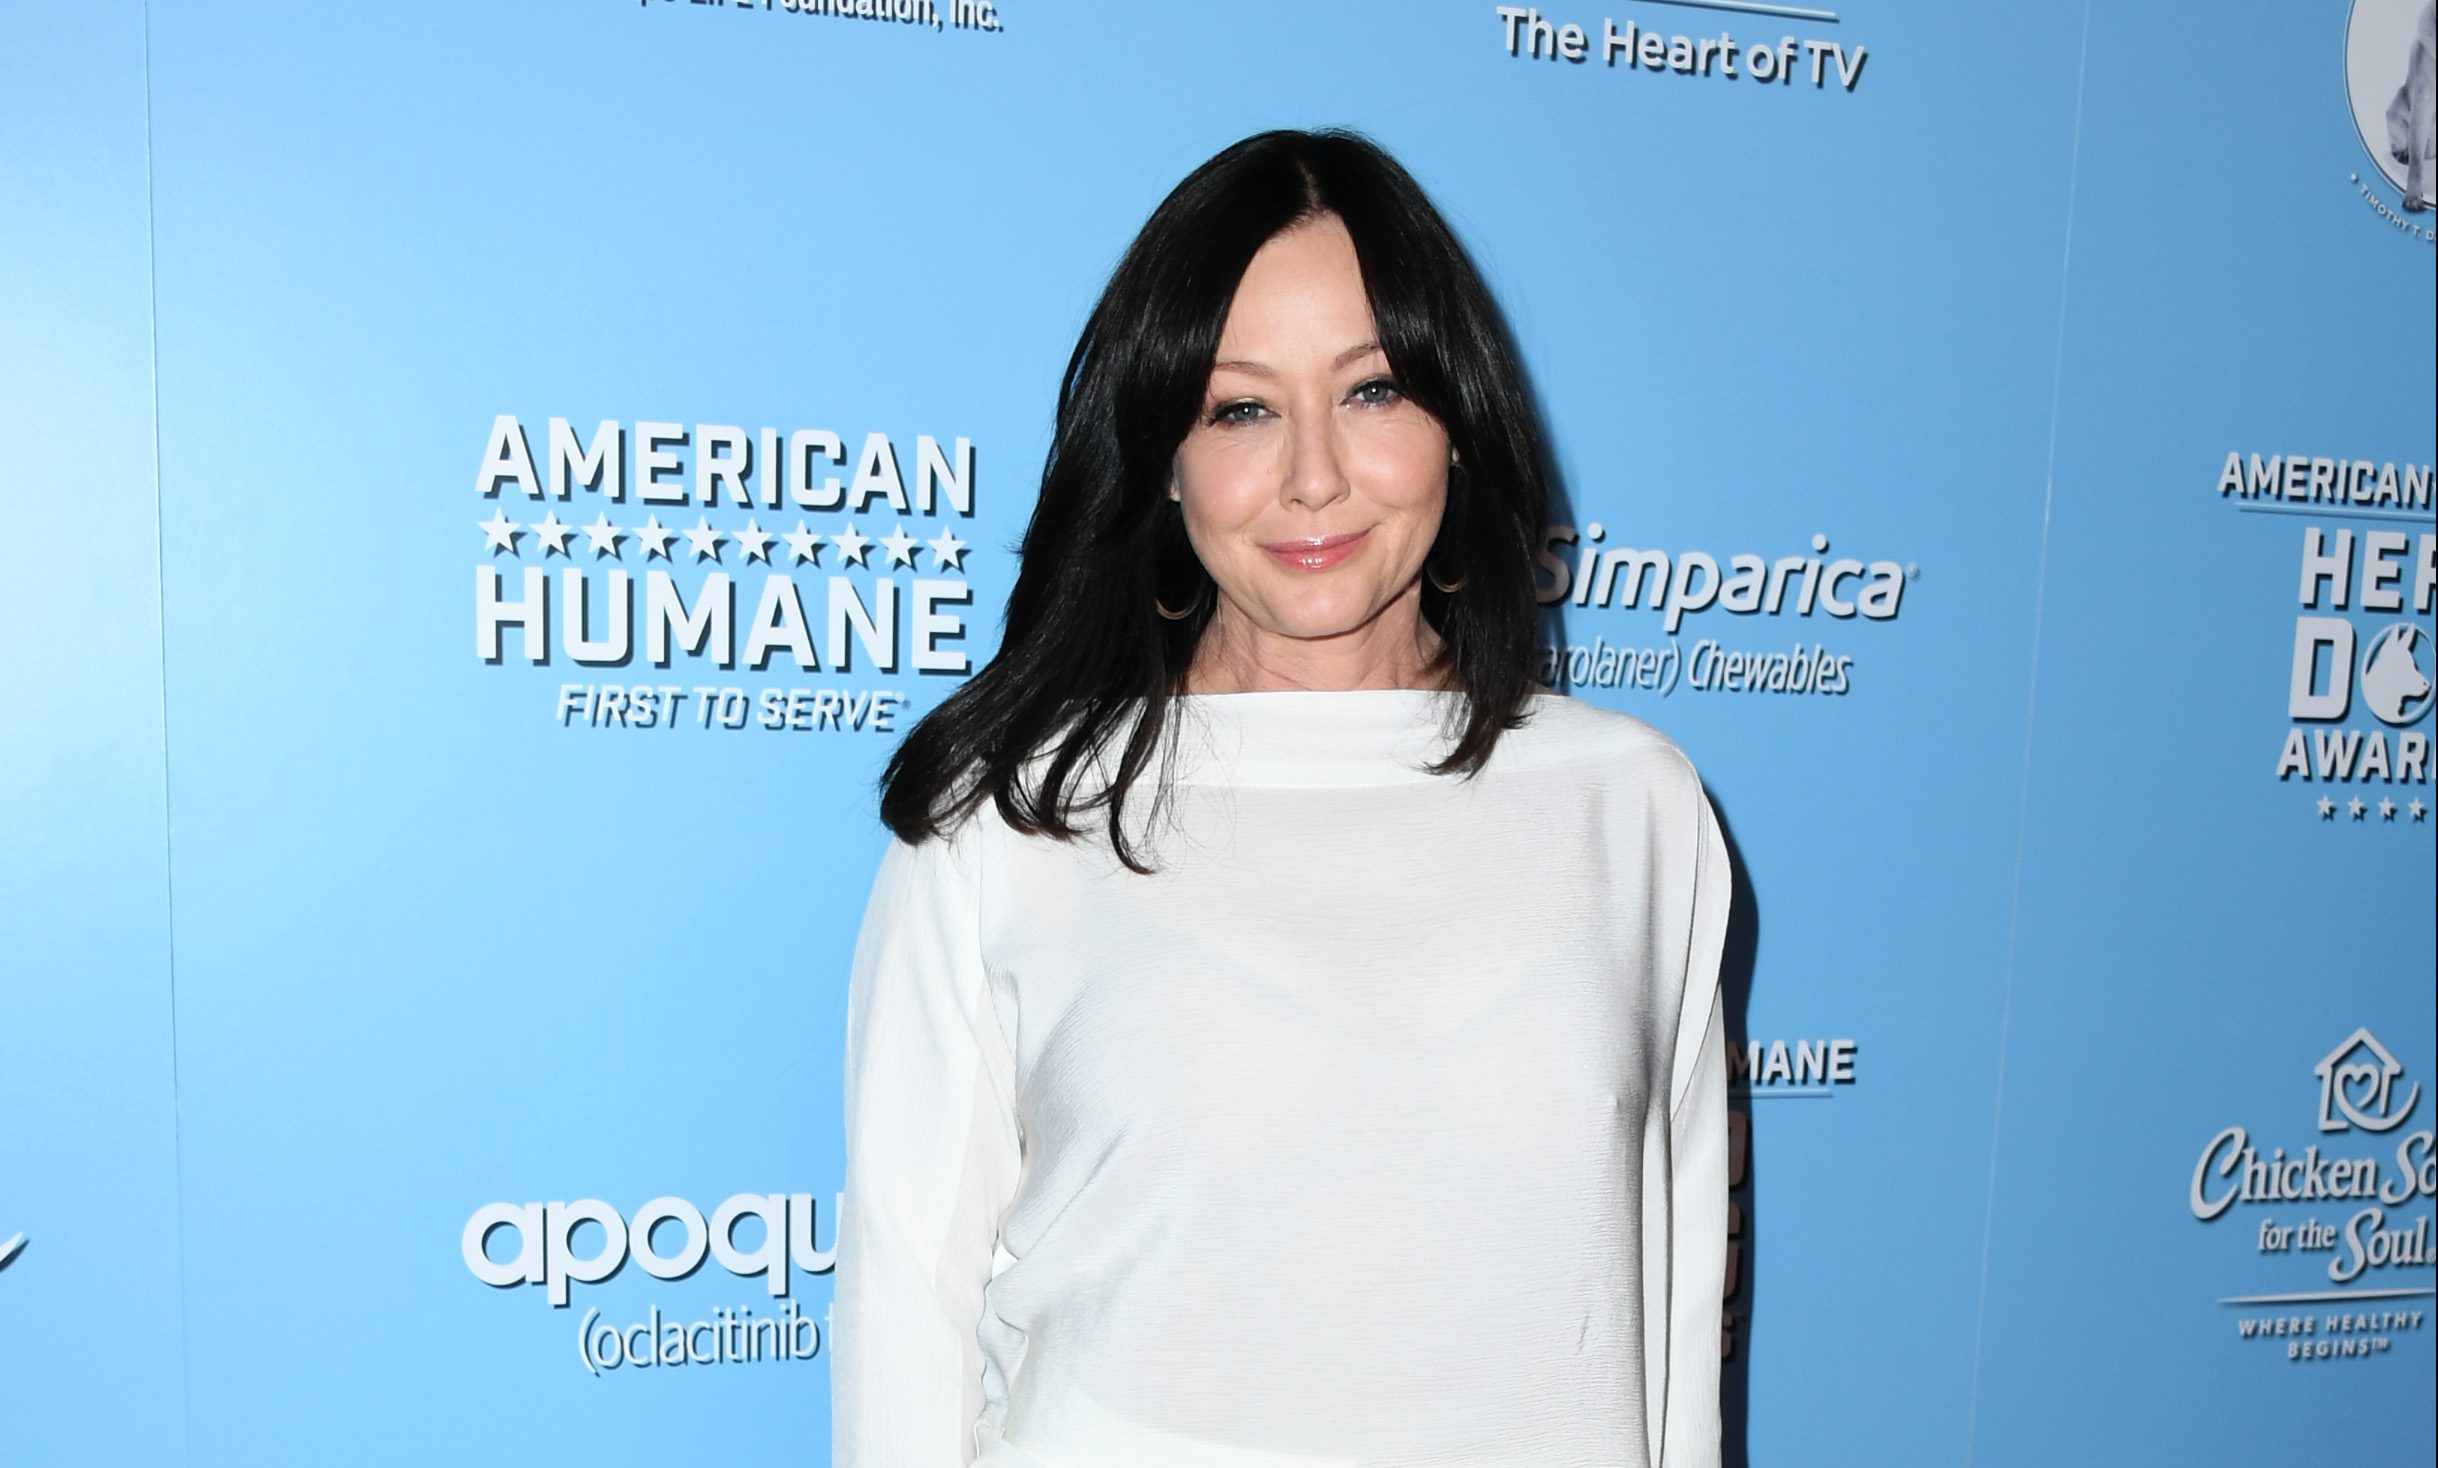 Shannen Doherty shares cancer has spread to her bones